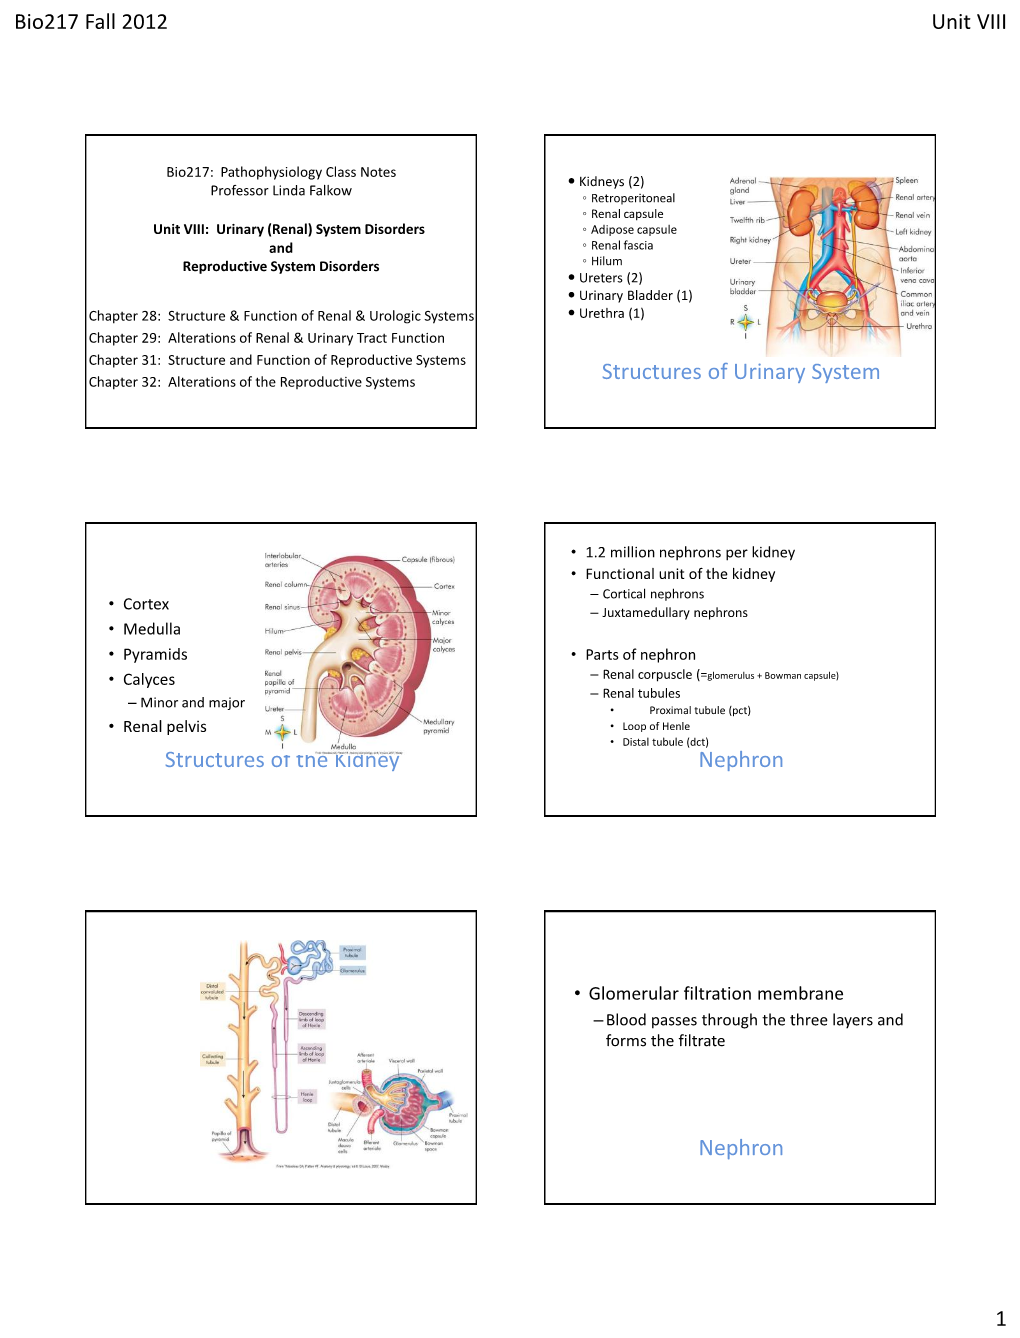 Structures of Urinary System Structures of the Kidney Nephron